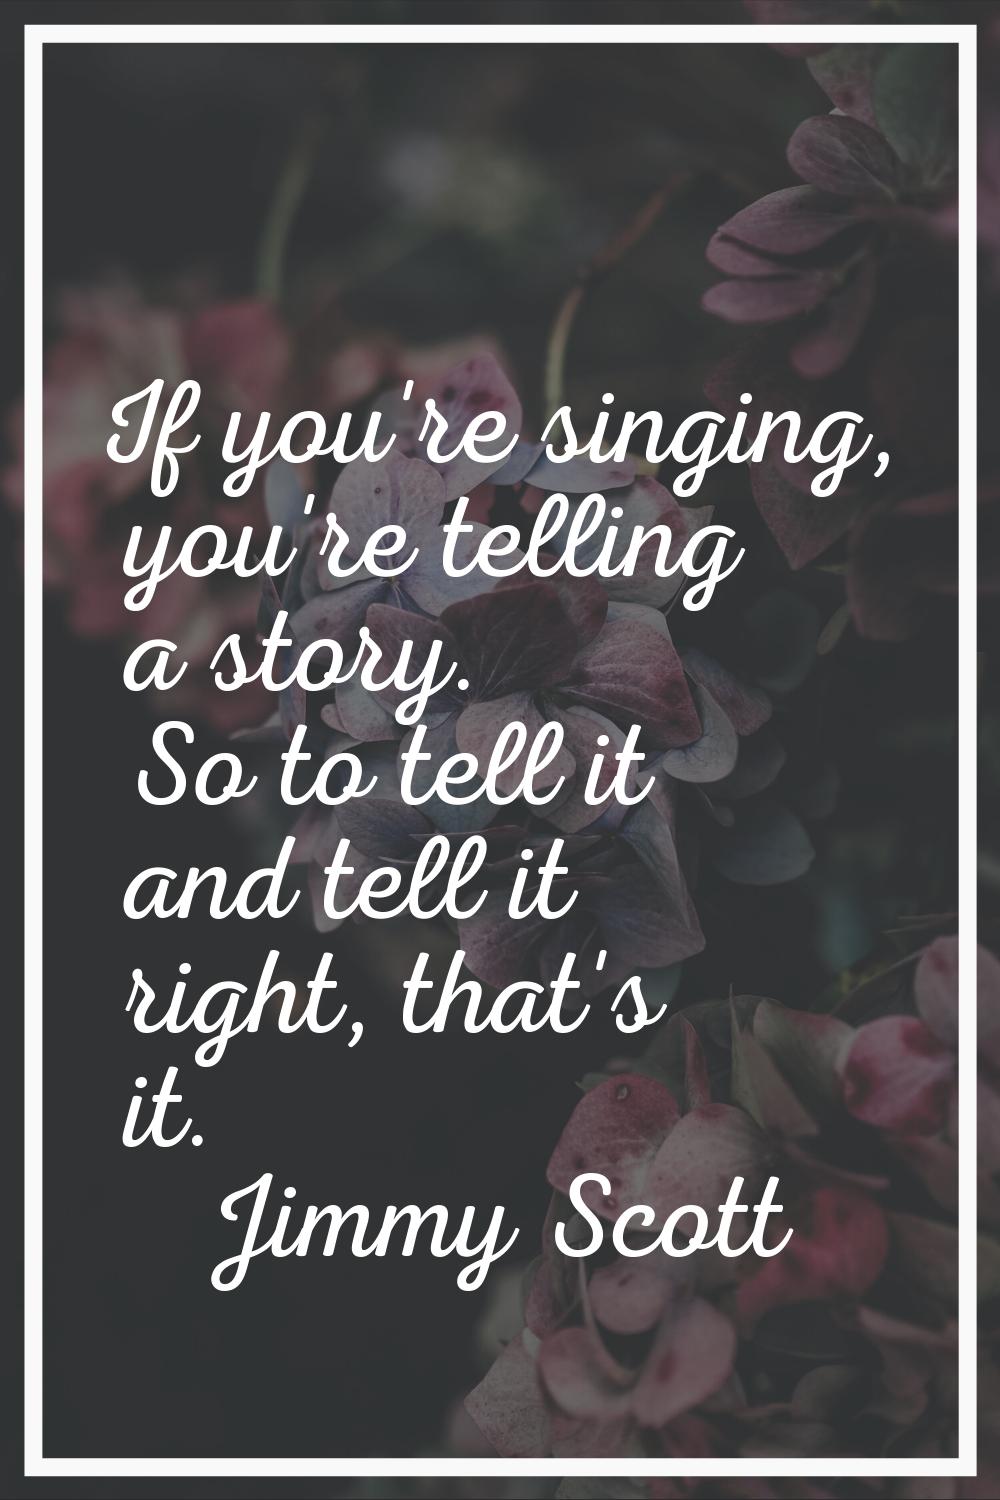 If you're singing, you're telling a story. So to tell it and tell it right, that's it.